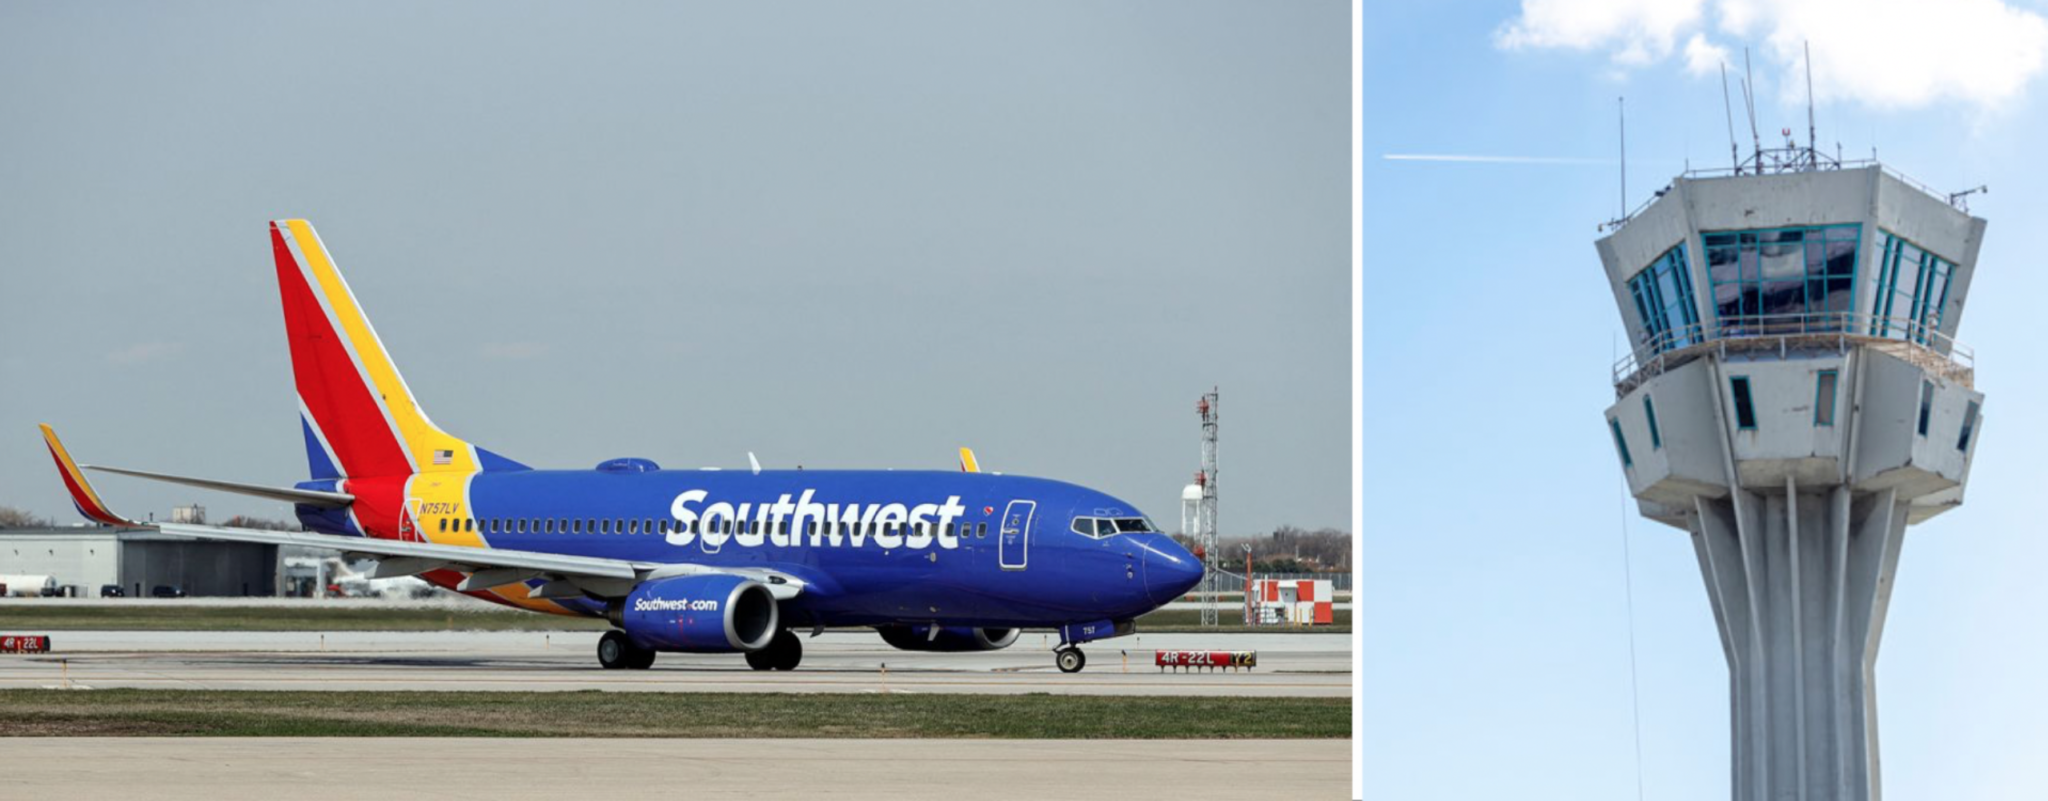 southwest airlines cancelled flights 1256 today